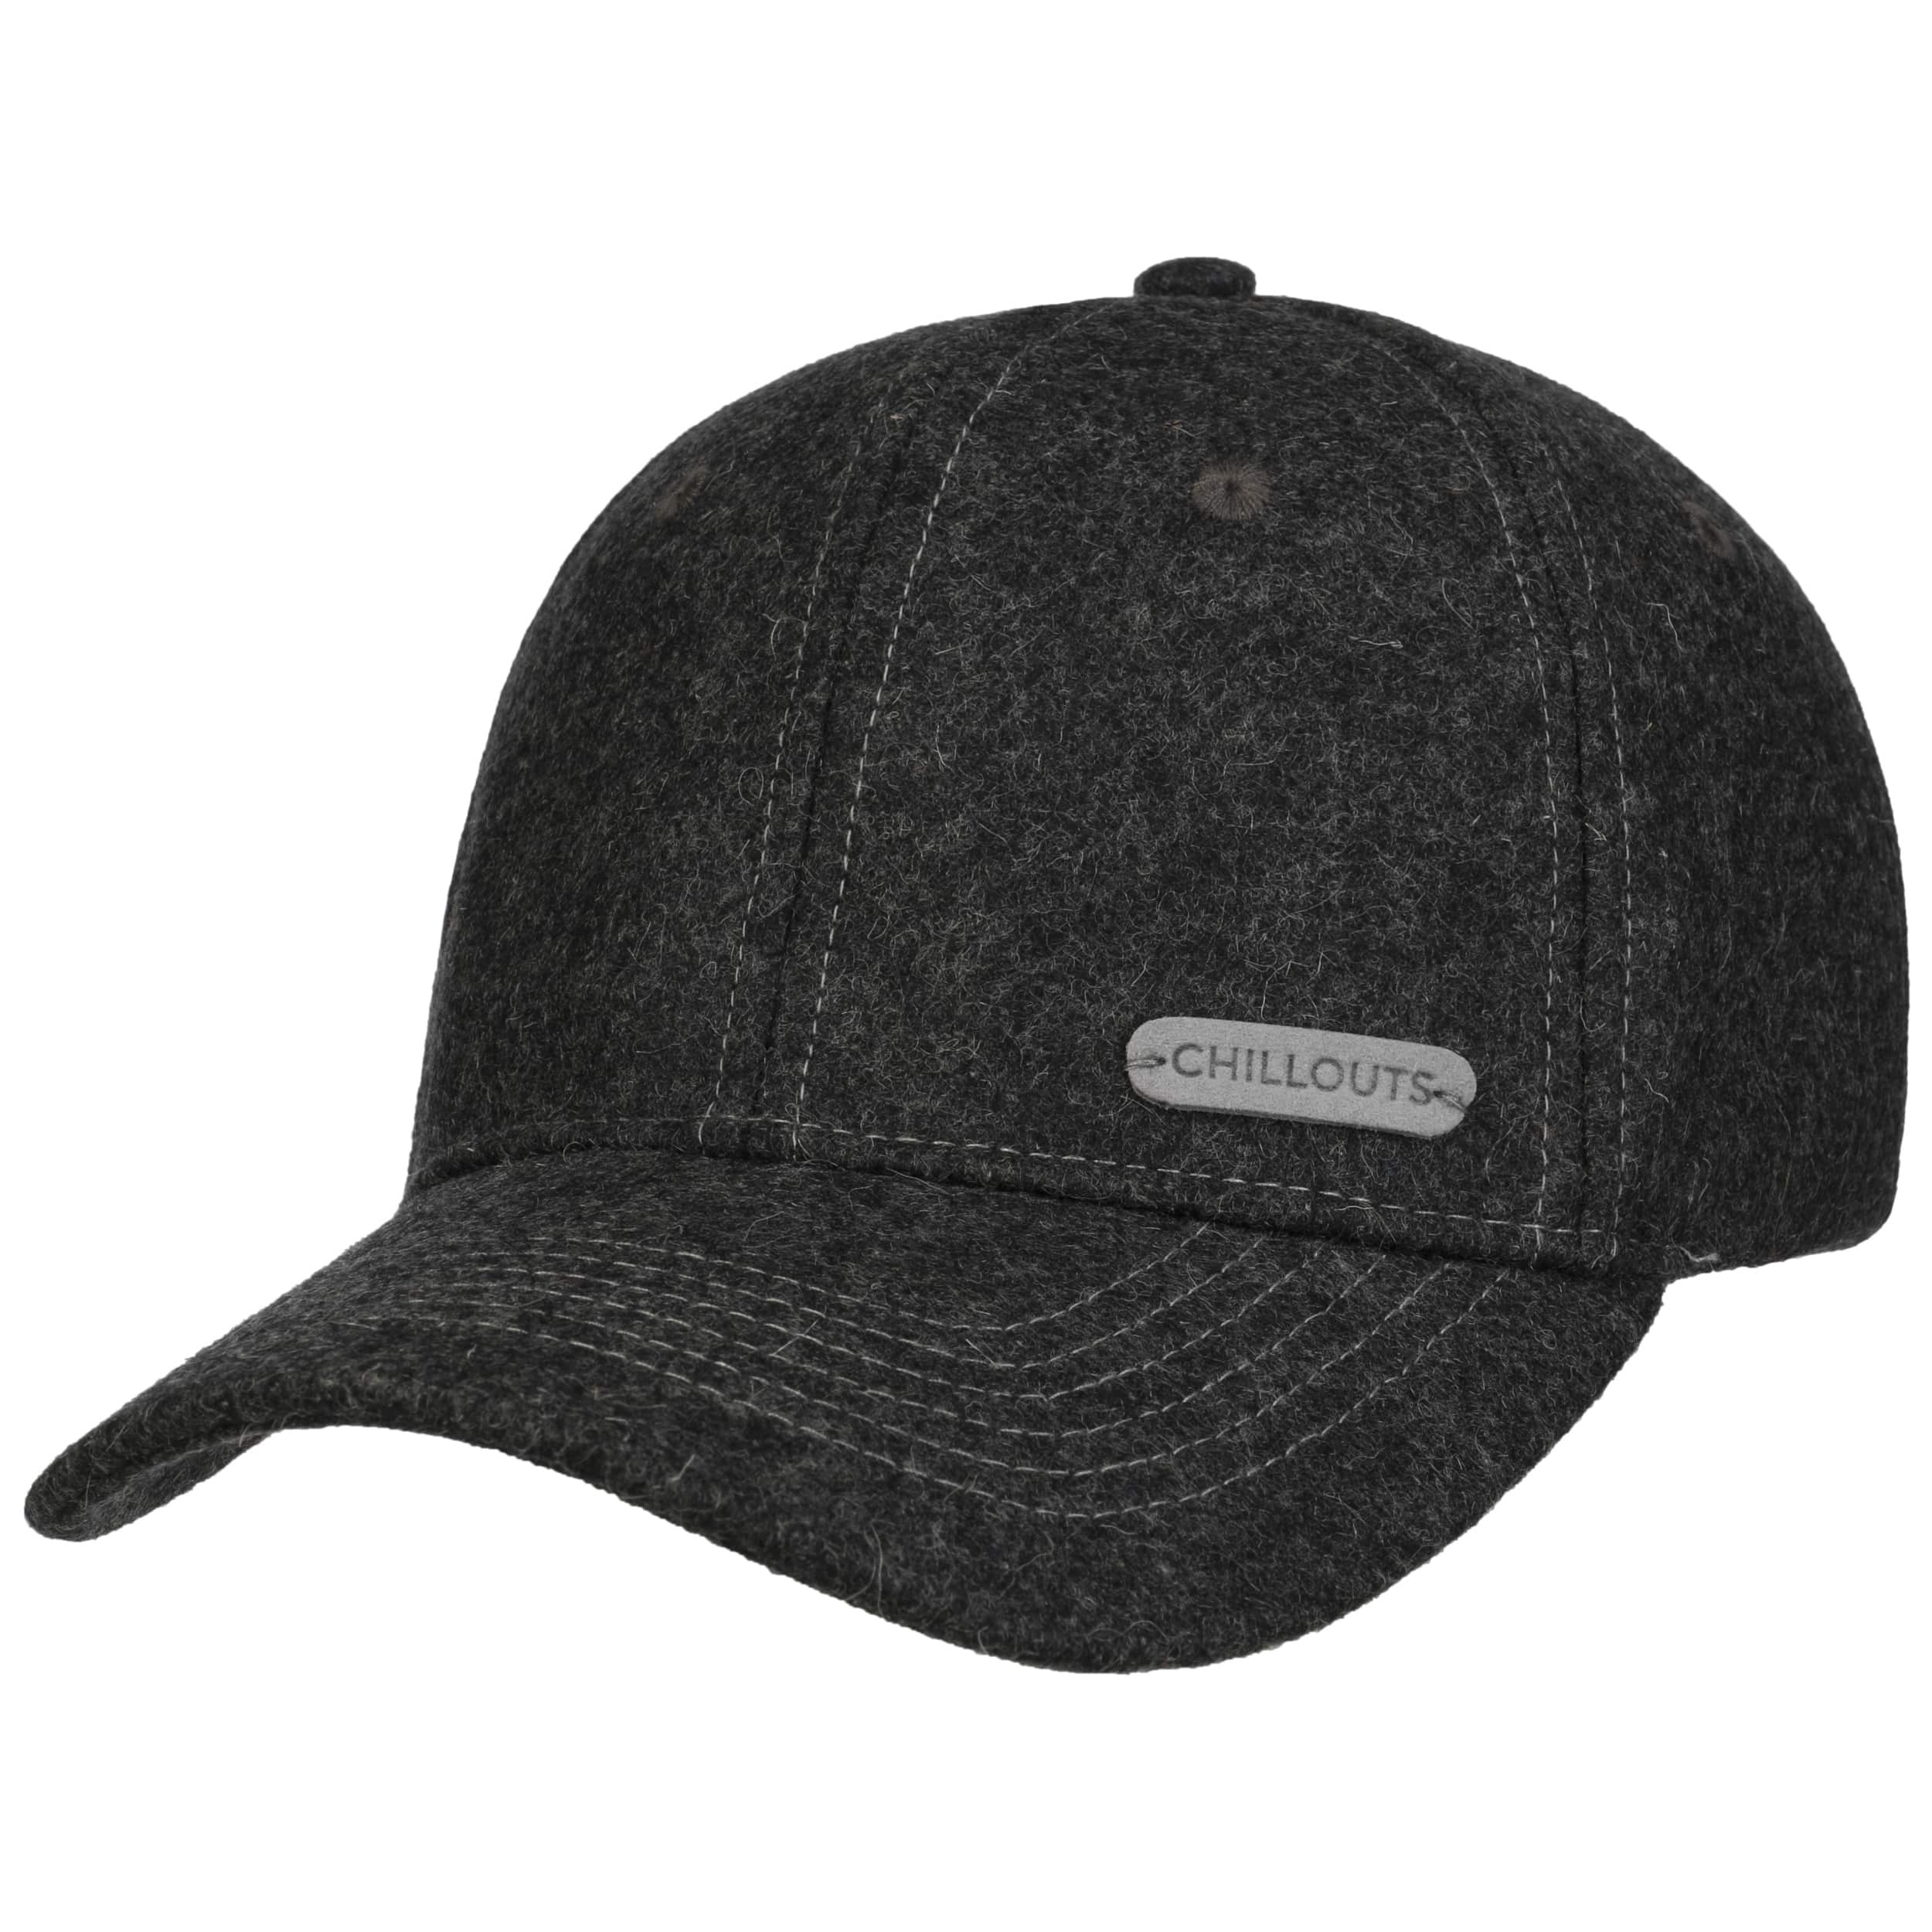 Matero Cap by Chillouts - 33,95 CHF